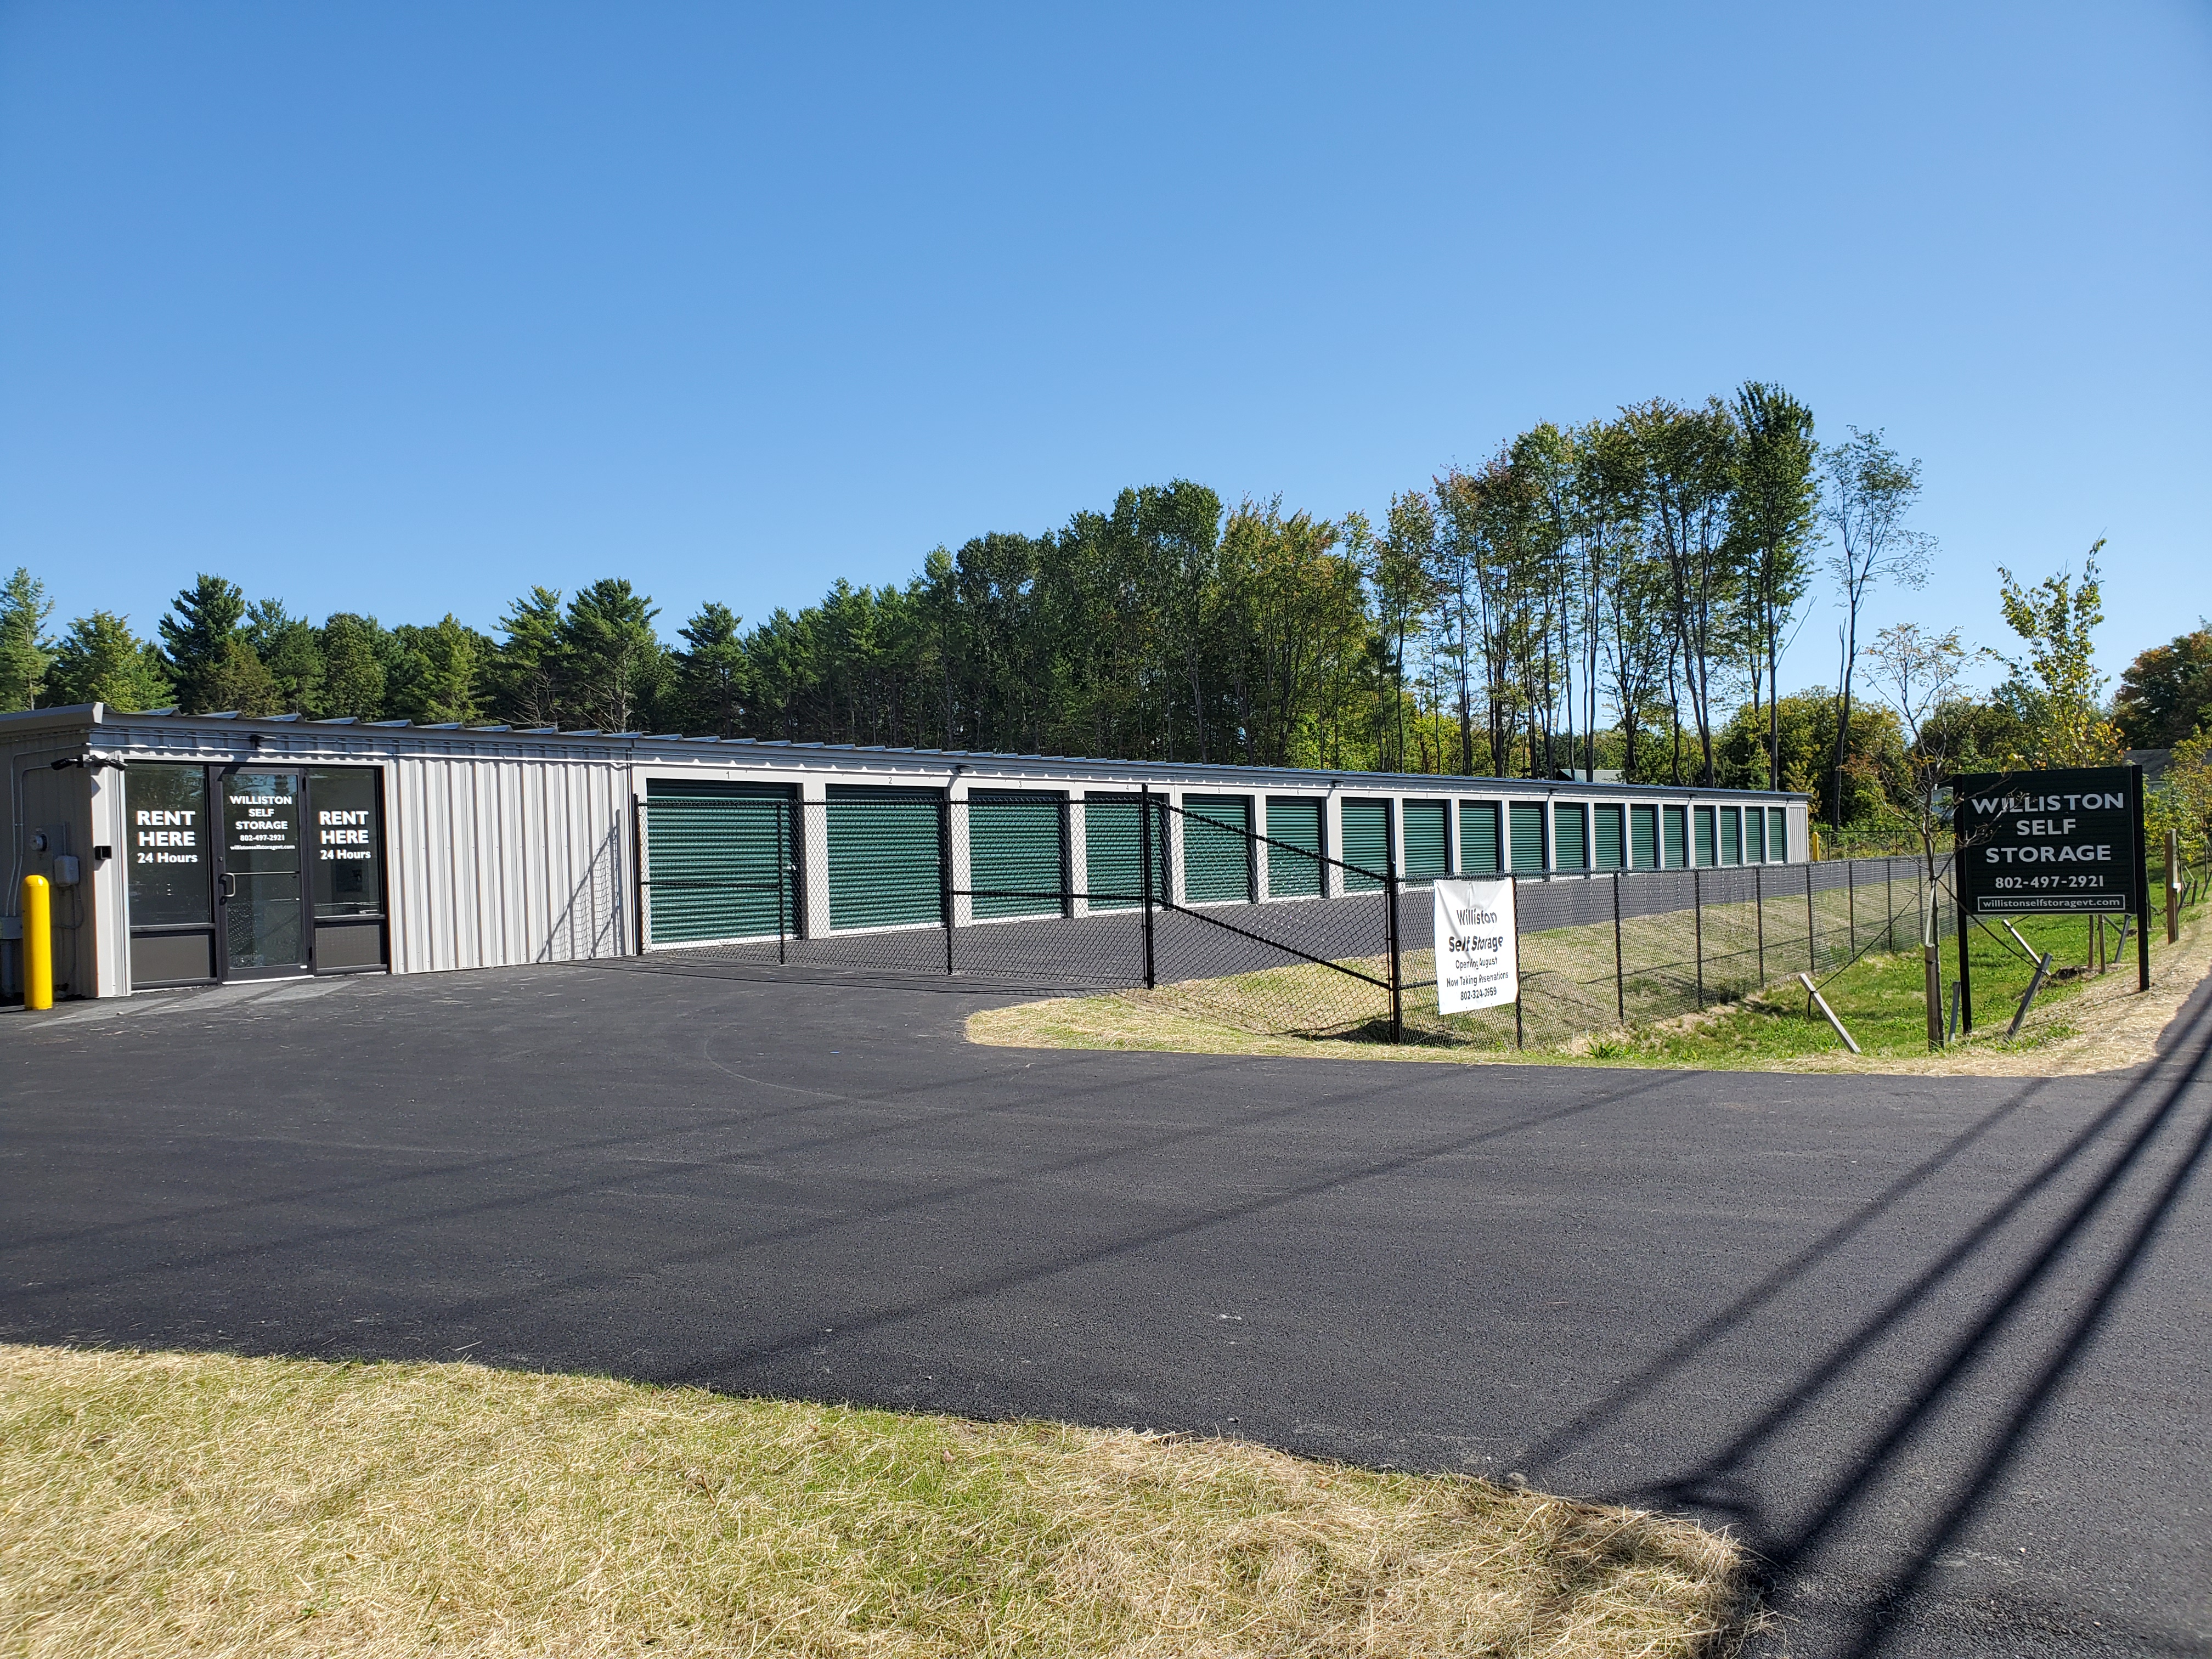 Secure and clean storage units at Williston Self Storage